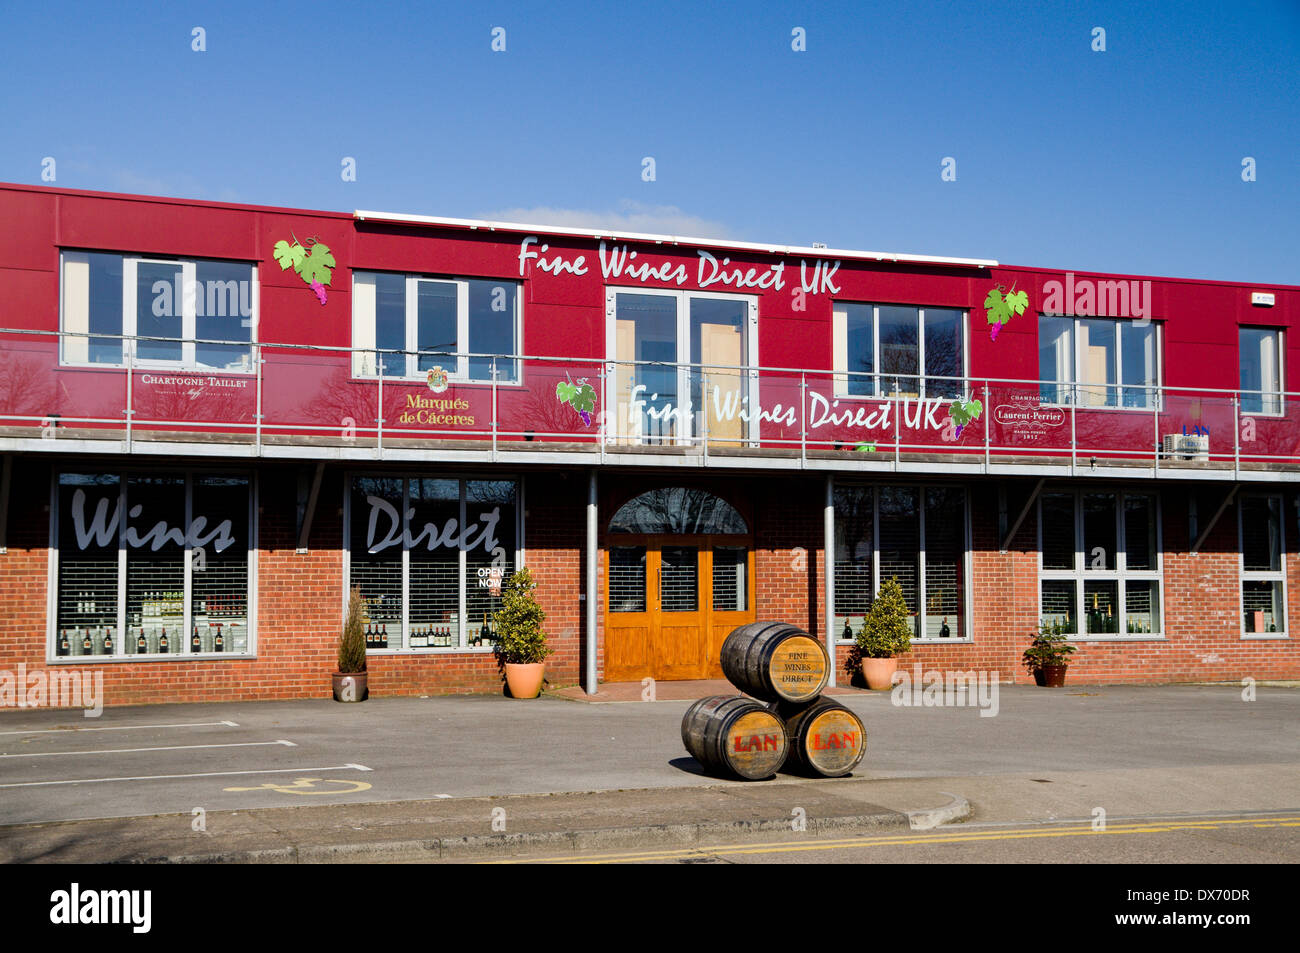 Fine Wines Direct, Wine Sellers shop, Penarth Road, Cardiff, Wales. Stock Photo